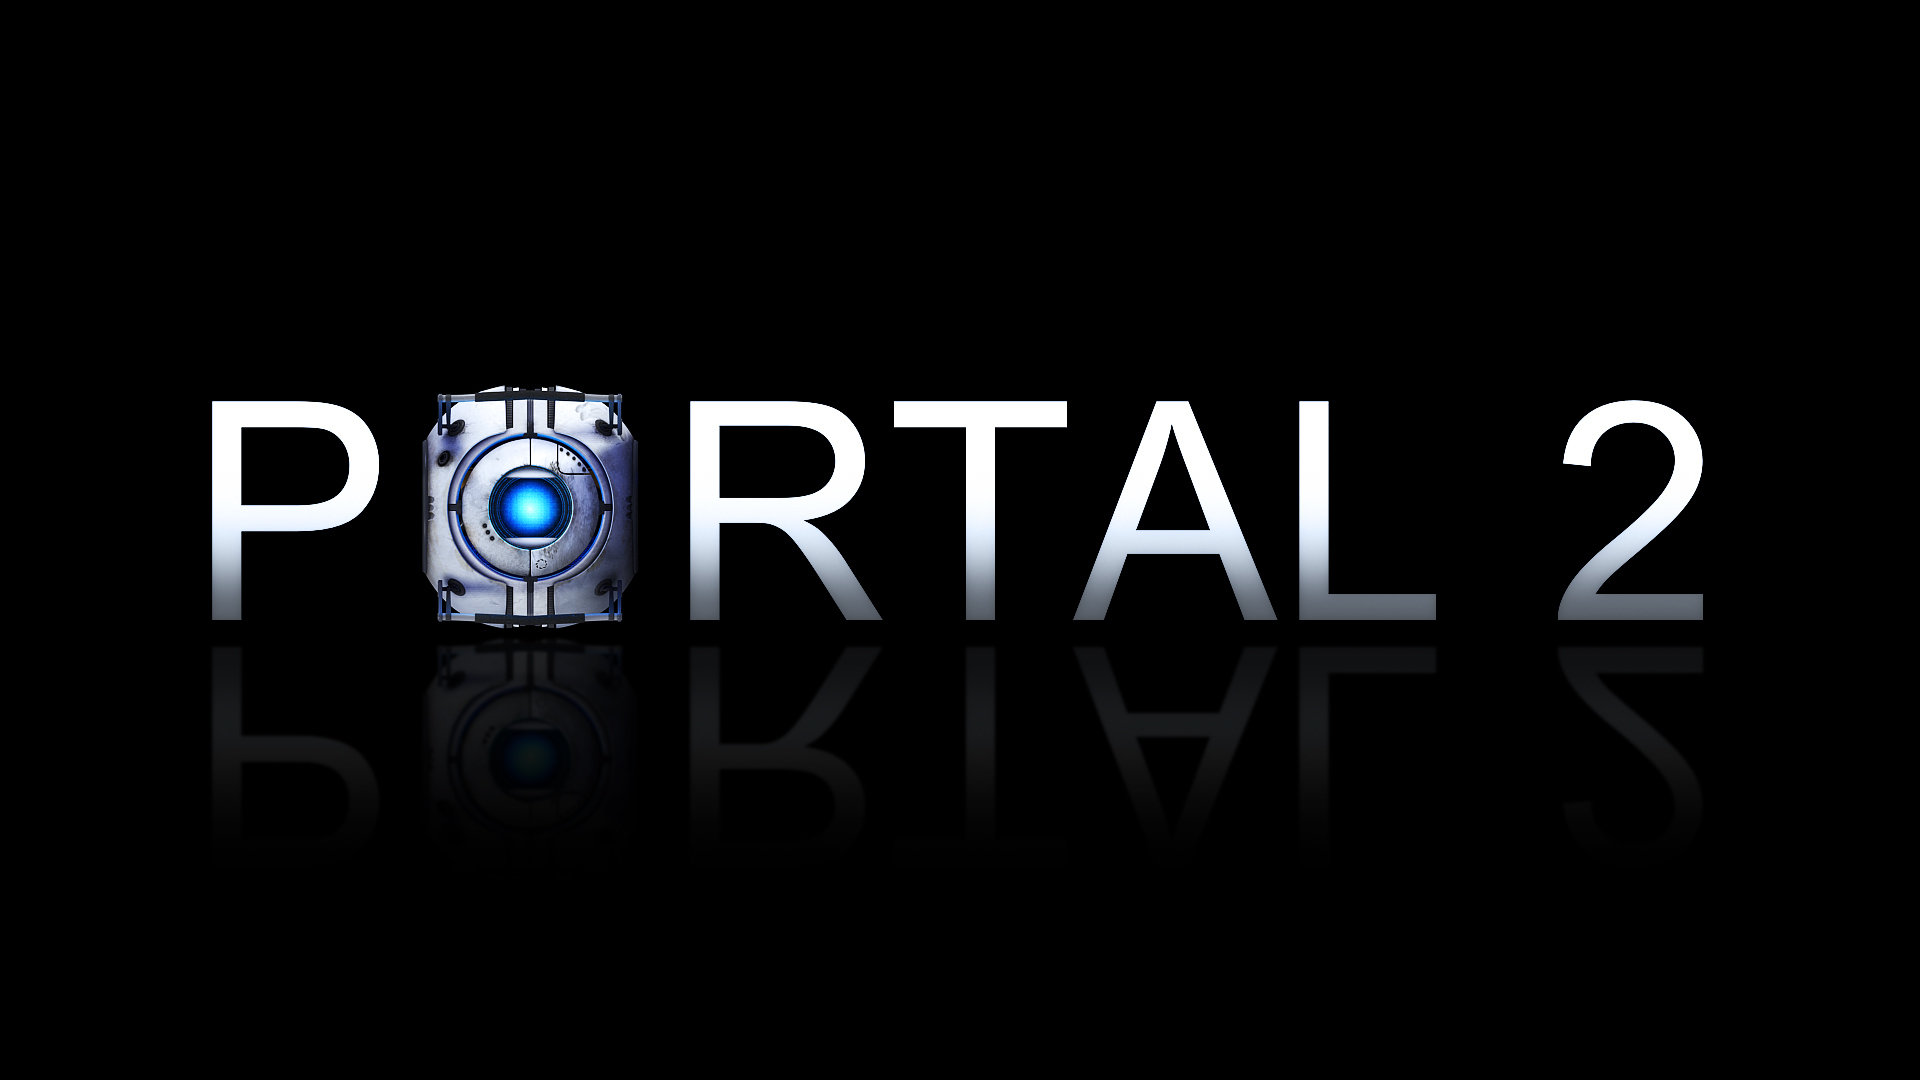 Download full hd 1920x1080 Portal 2 PC background ID:320309 for free